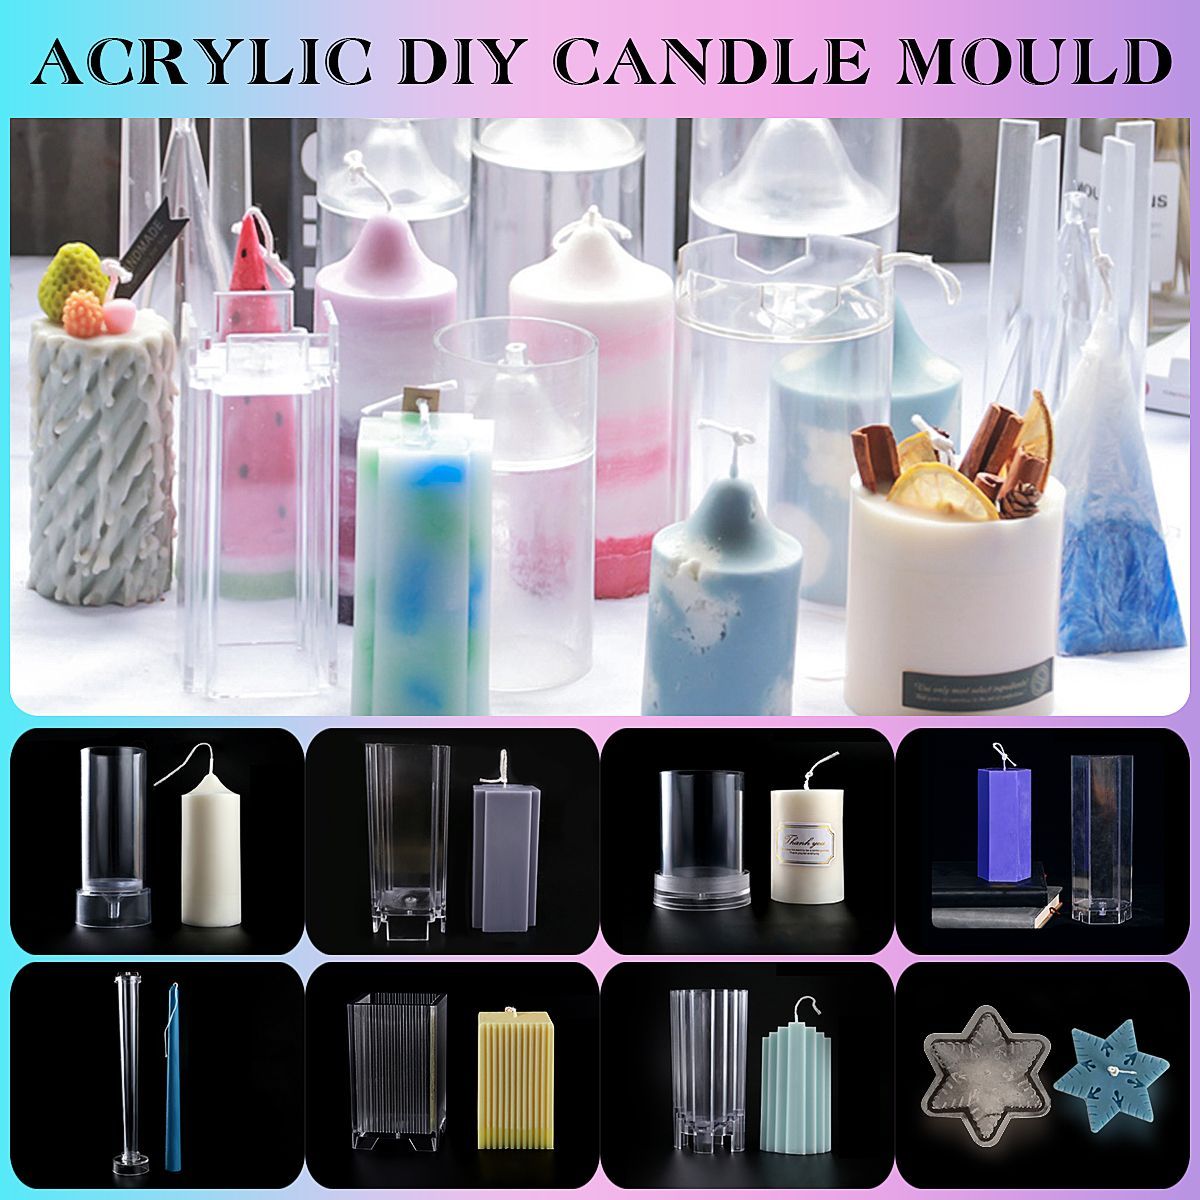 DIY-Candle-Molds-Candle-Making-Mould-Handmade-Soap-Acrylic-Mold-Clay-Craft-Gift-1597535